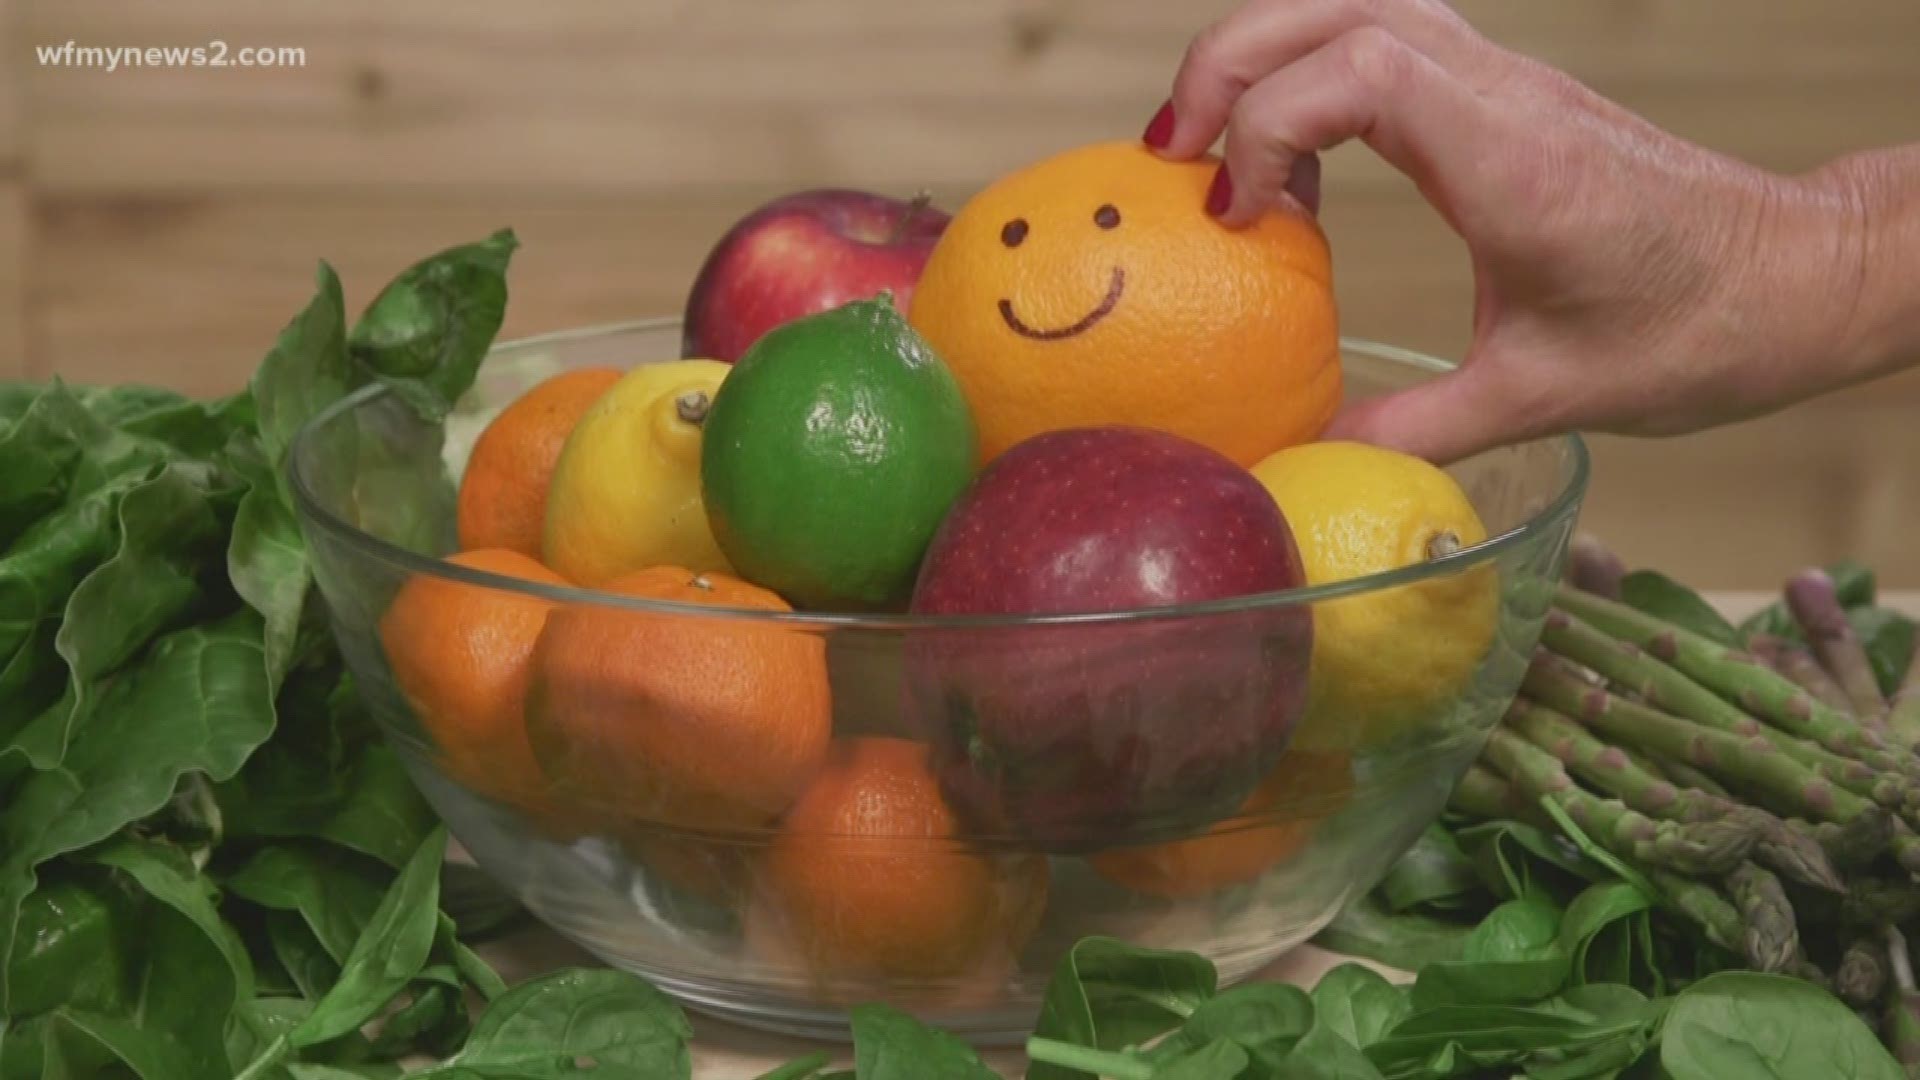 Consumer Reports found certain foods can help put you in a good mood.